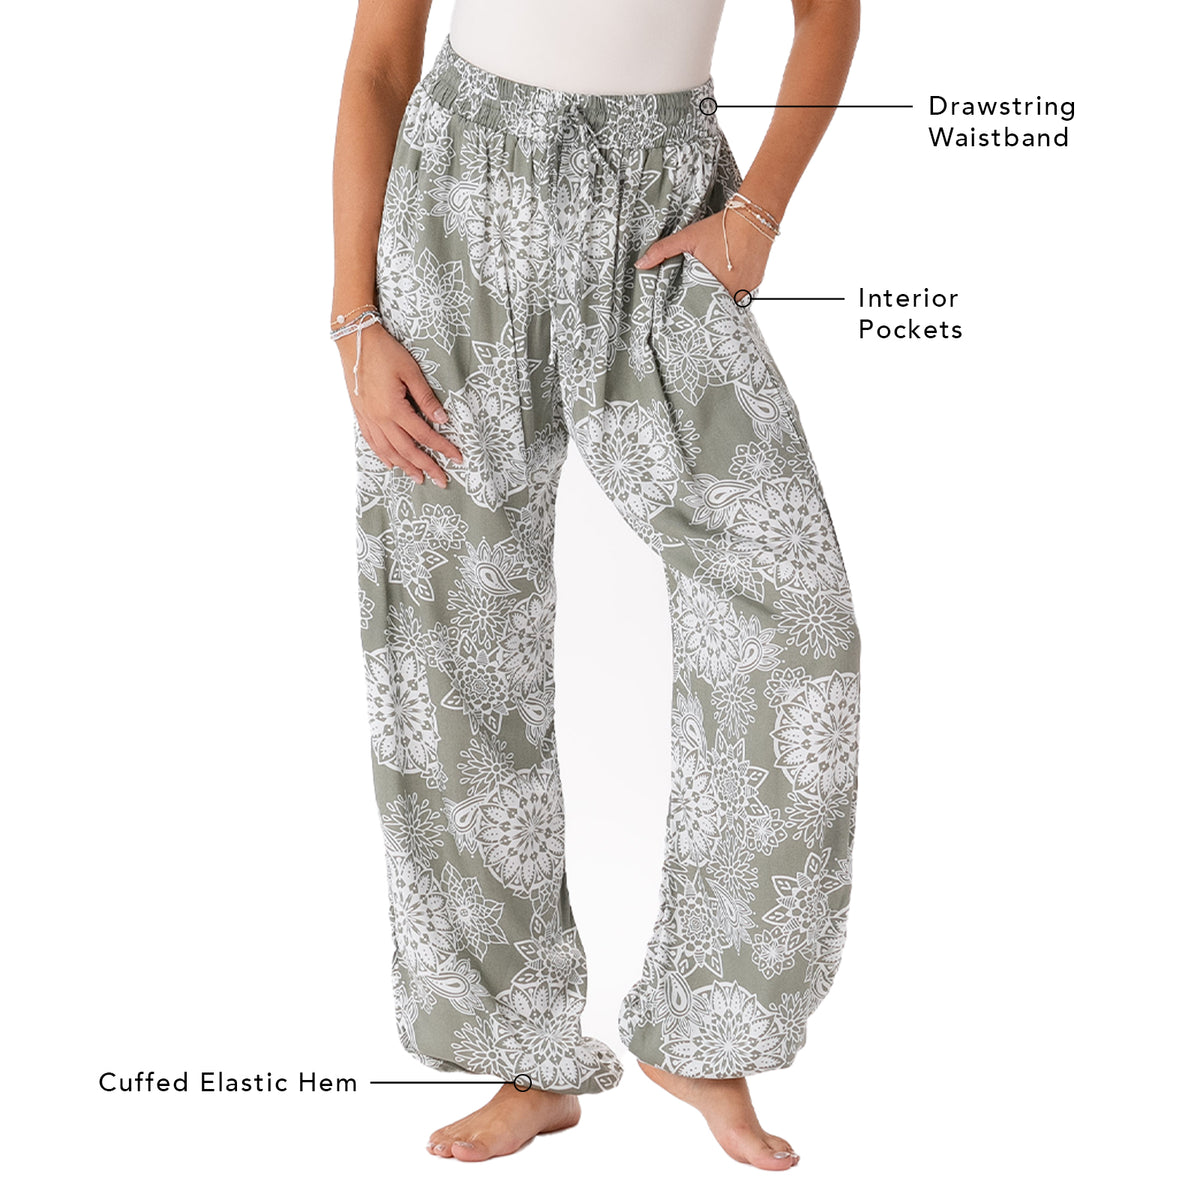 Model wearing fern colored harem pants with a mandala paisley print. Photo outlines the pant&#39;s features including drawstring waistband, interior pockets and a cuffed elastic bottom hem